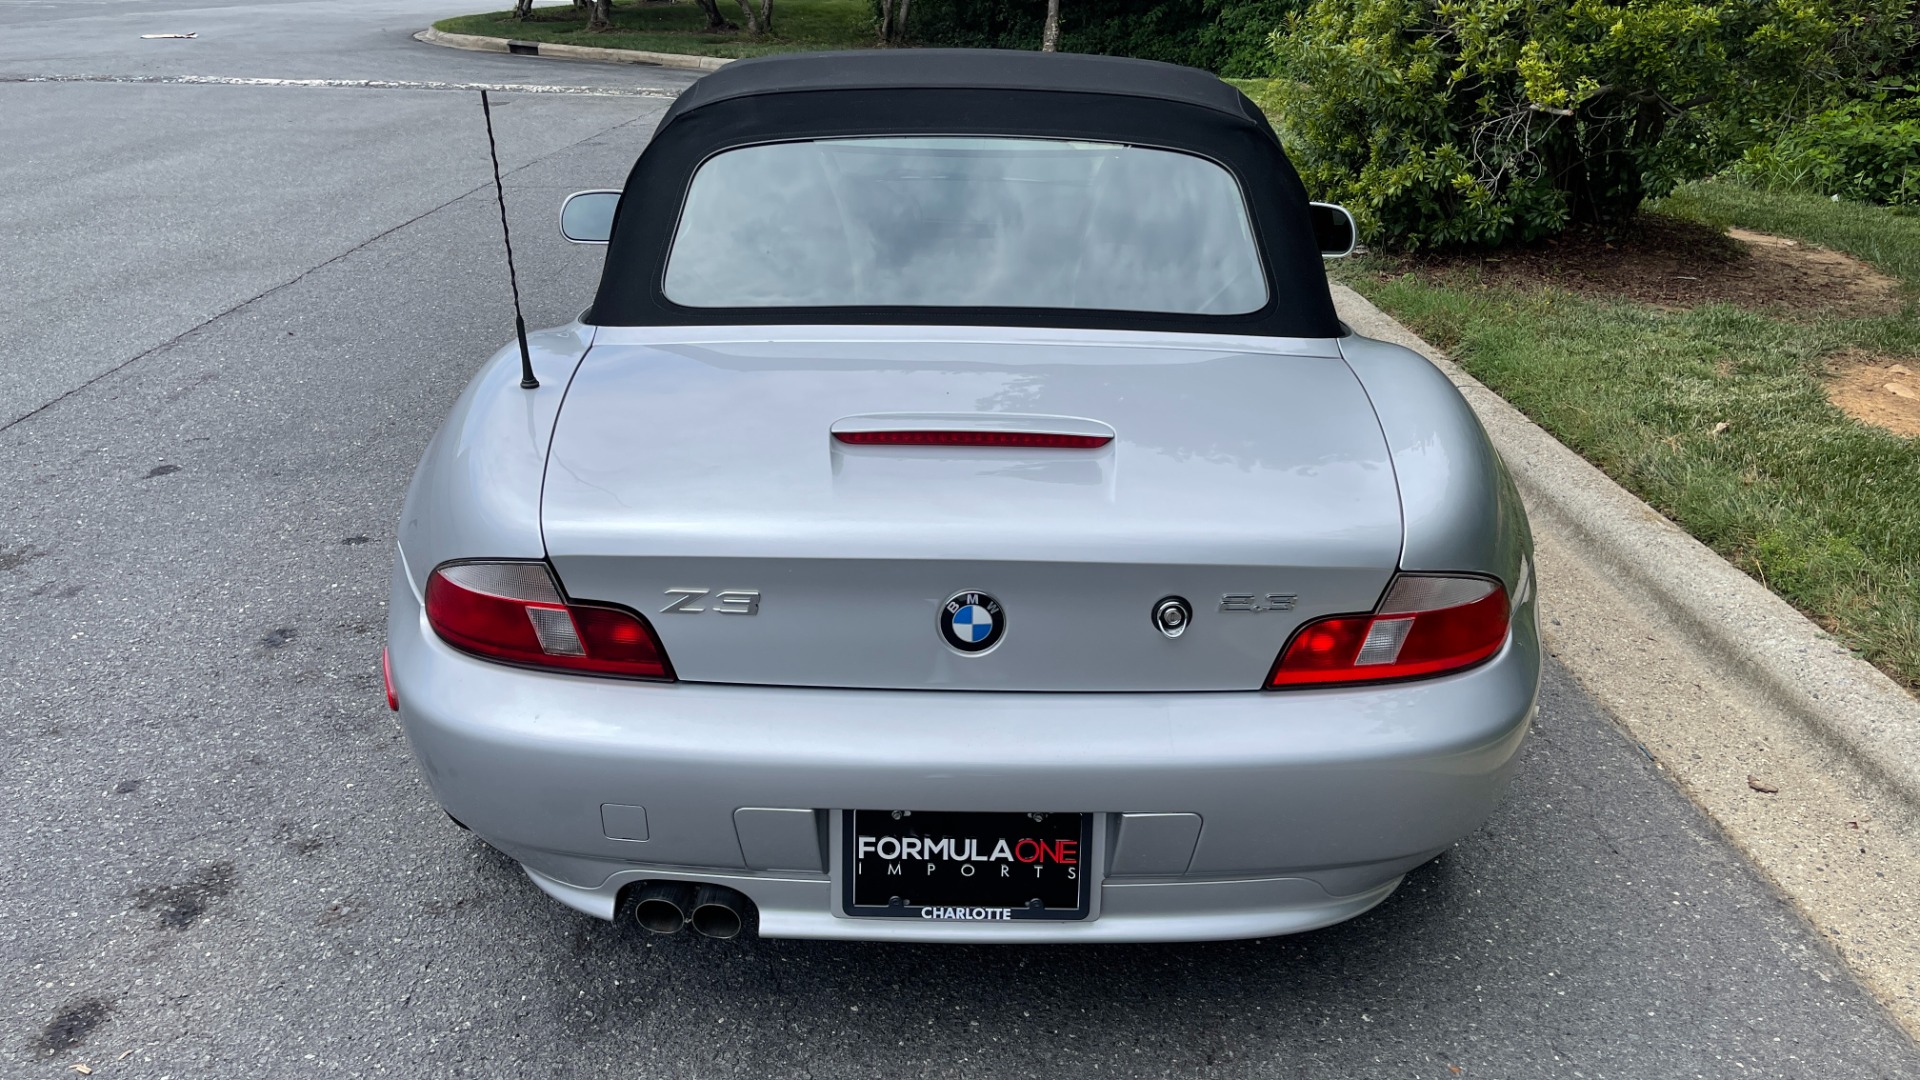 Used 2000 BMW Z3 2.5L / CONVERTIBLE / PWR TOP / AUTOMATIC / HEATED SEATS / LEATHER for sale $12,995 at Formula Imports in Charlotte NC 28227 10